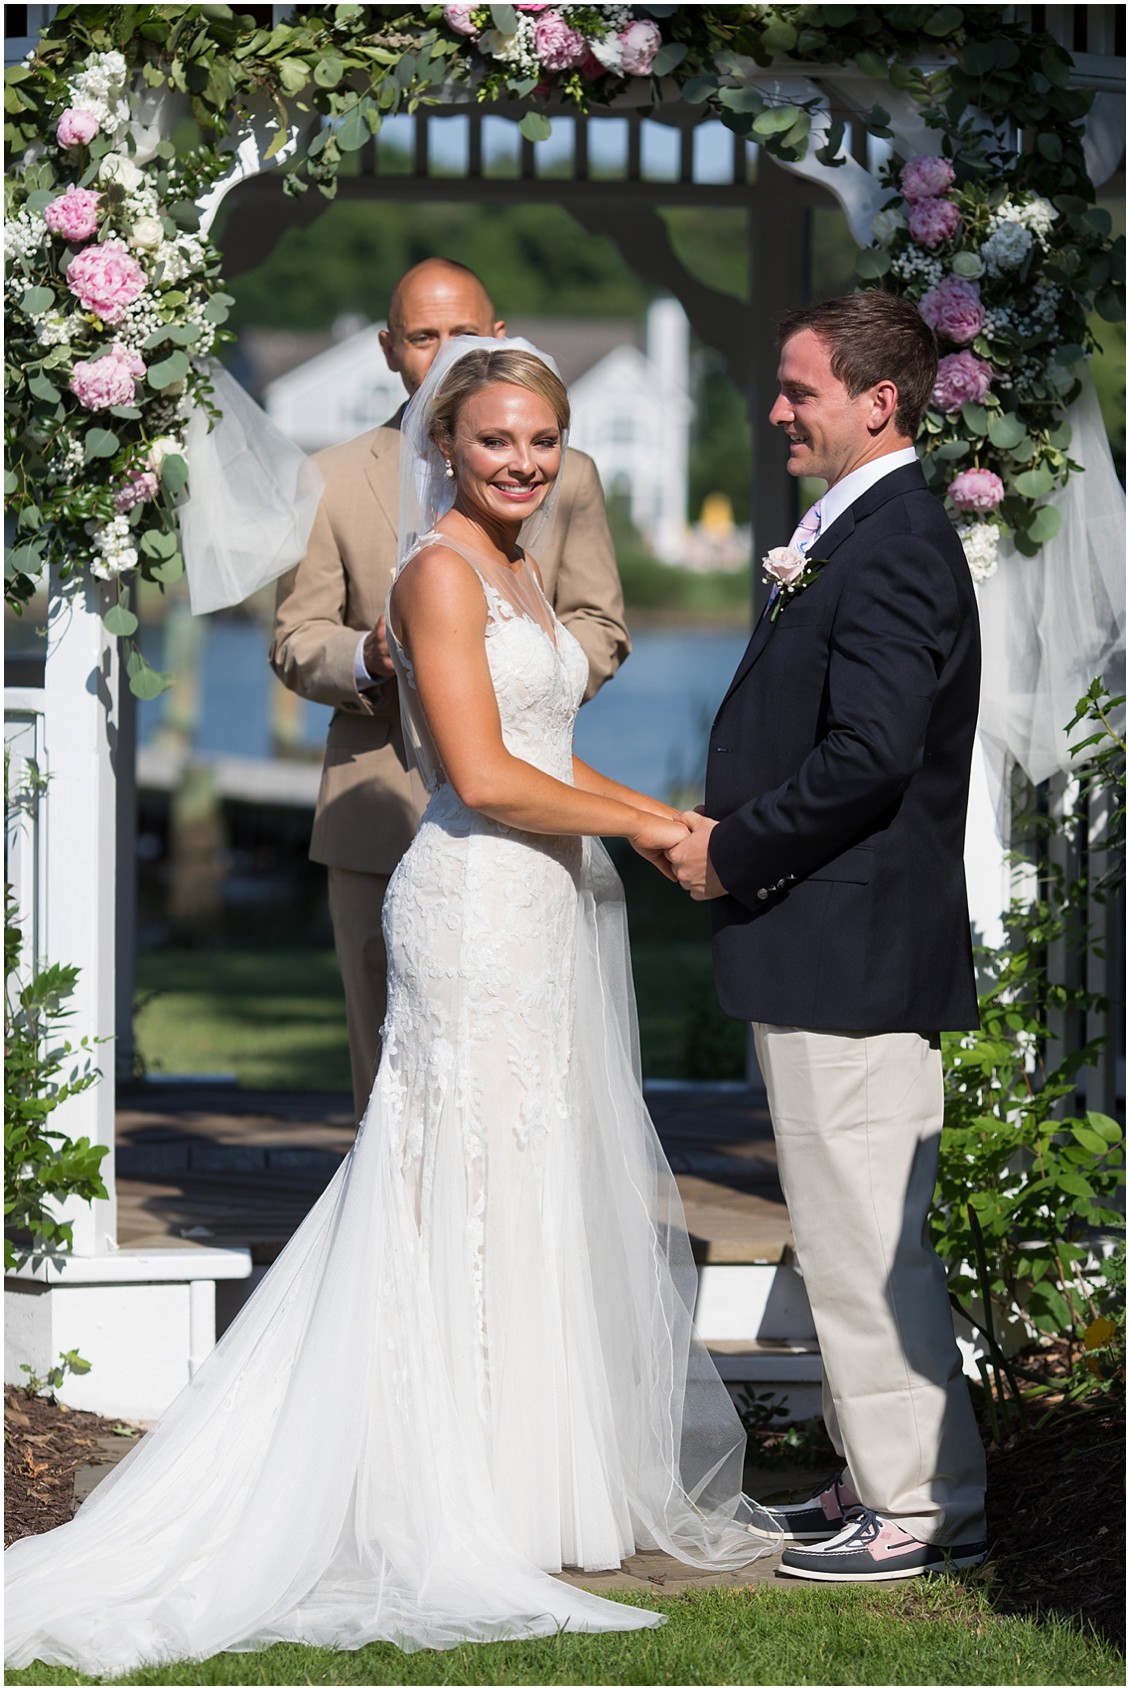 Bride and groom at the wedding altar, clasping hands. | My Eastern Shore Wedding | 